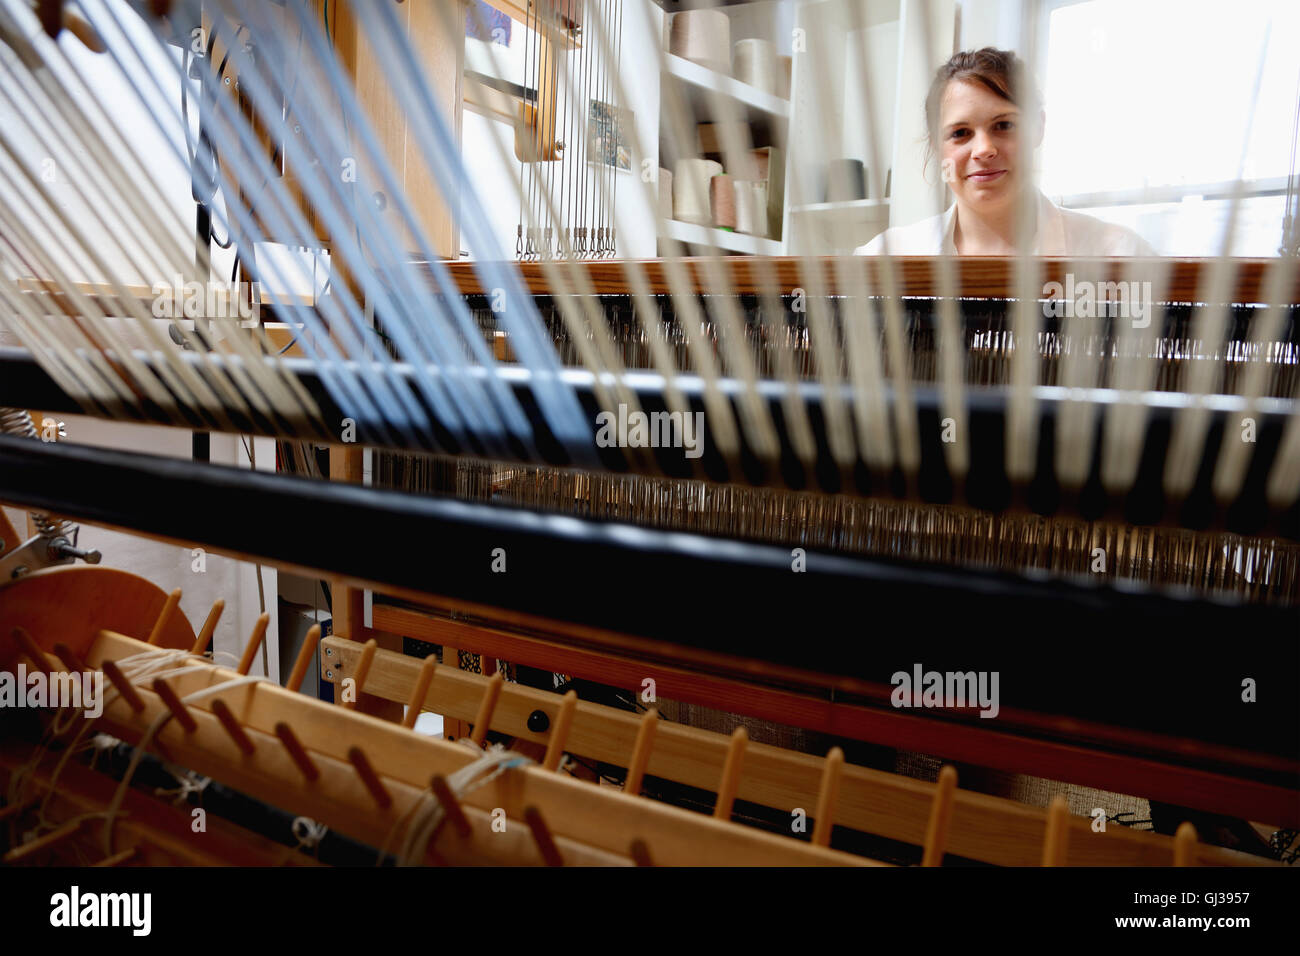 Young woman using loom Stock Photo